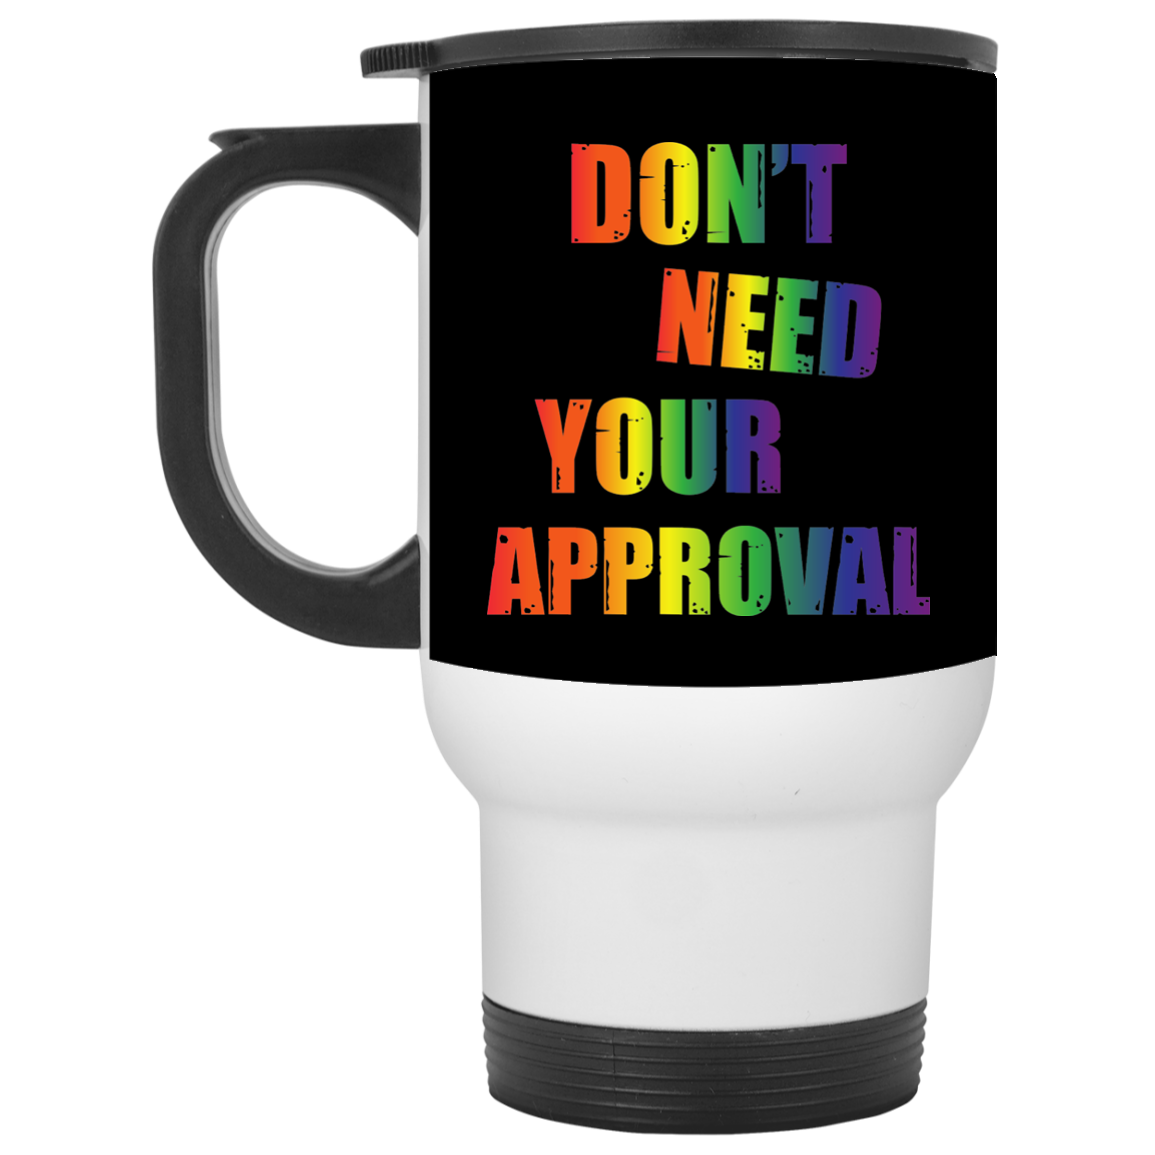 Don't need your approval